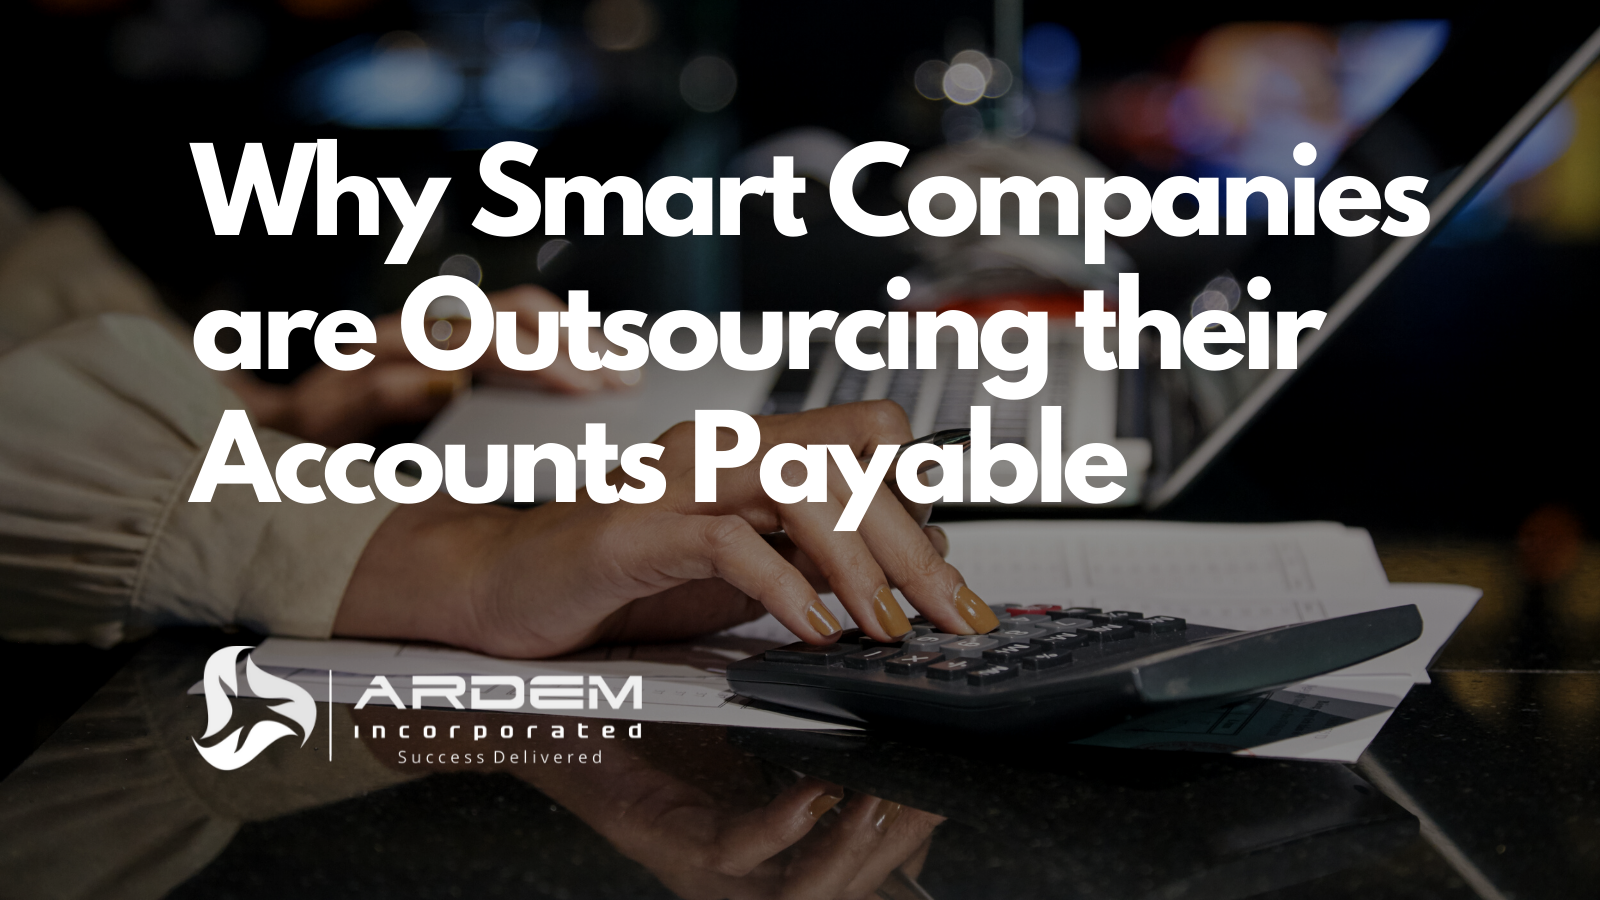 Accounts payable outsourcing companies